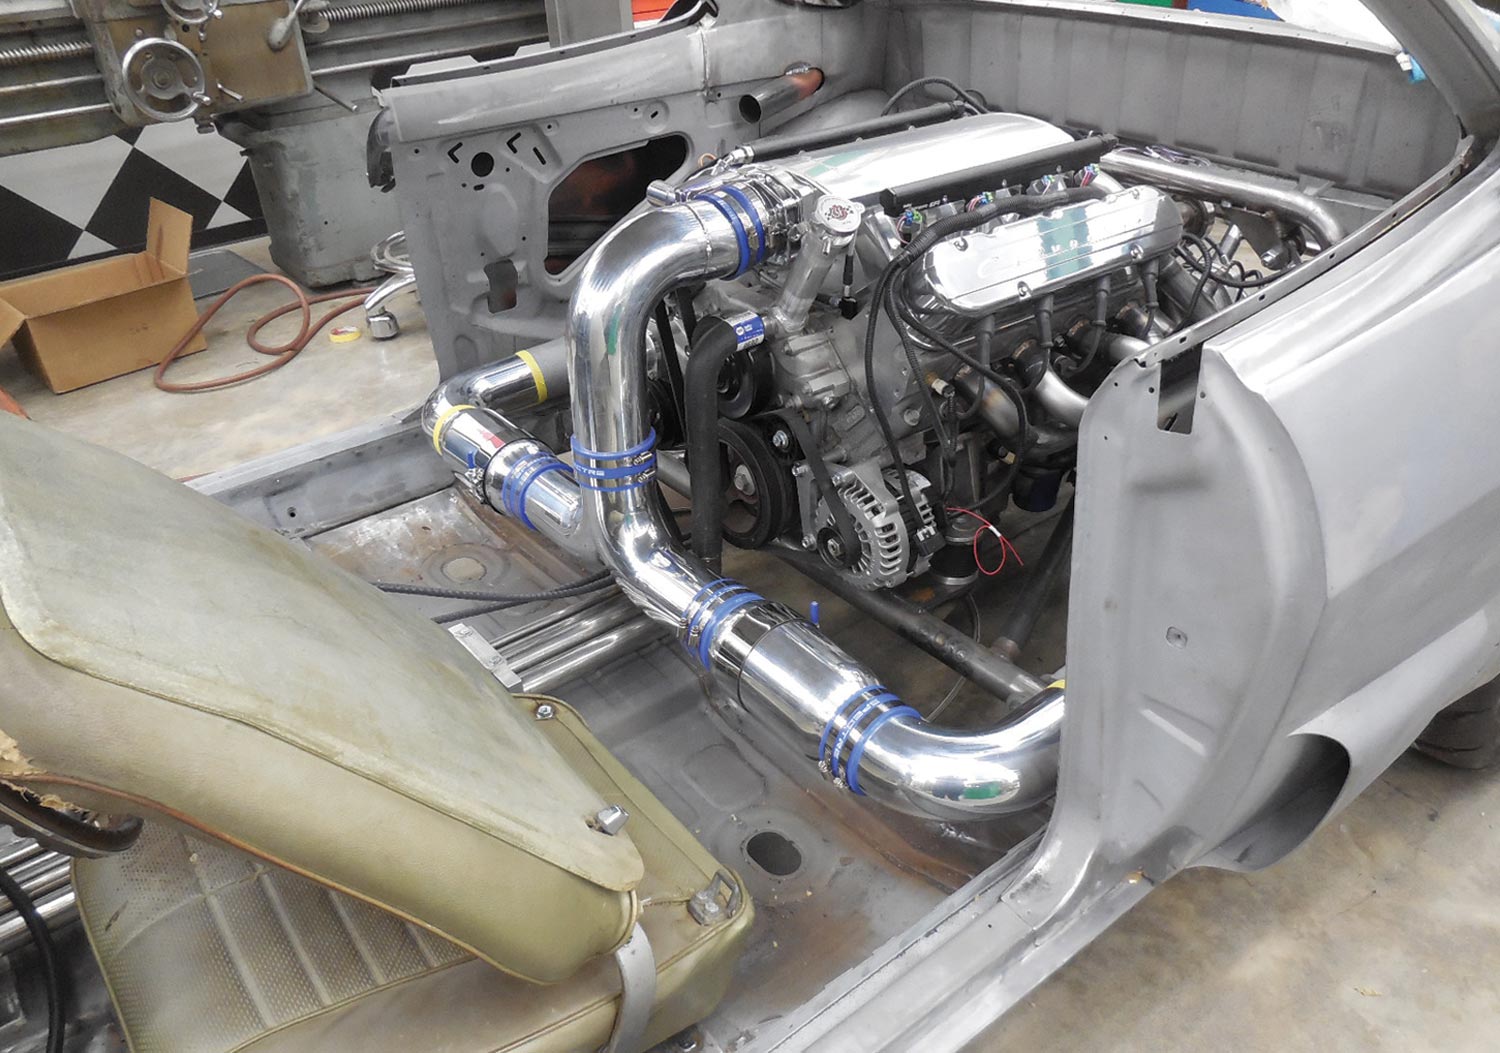 fresh air system is delivered by a pair of 4-inch tubes joined together in a “Y” that connects to Holley Sniper throttle body